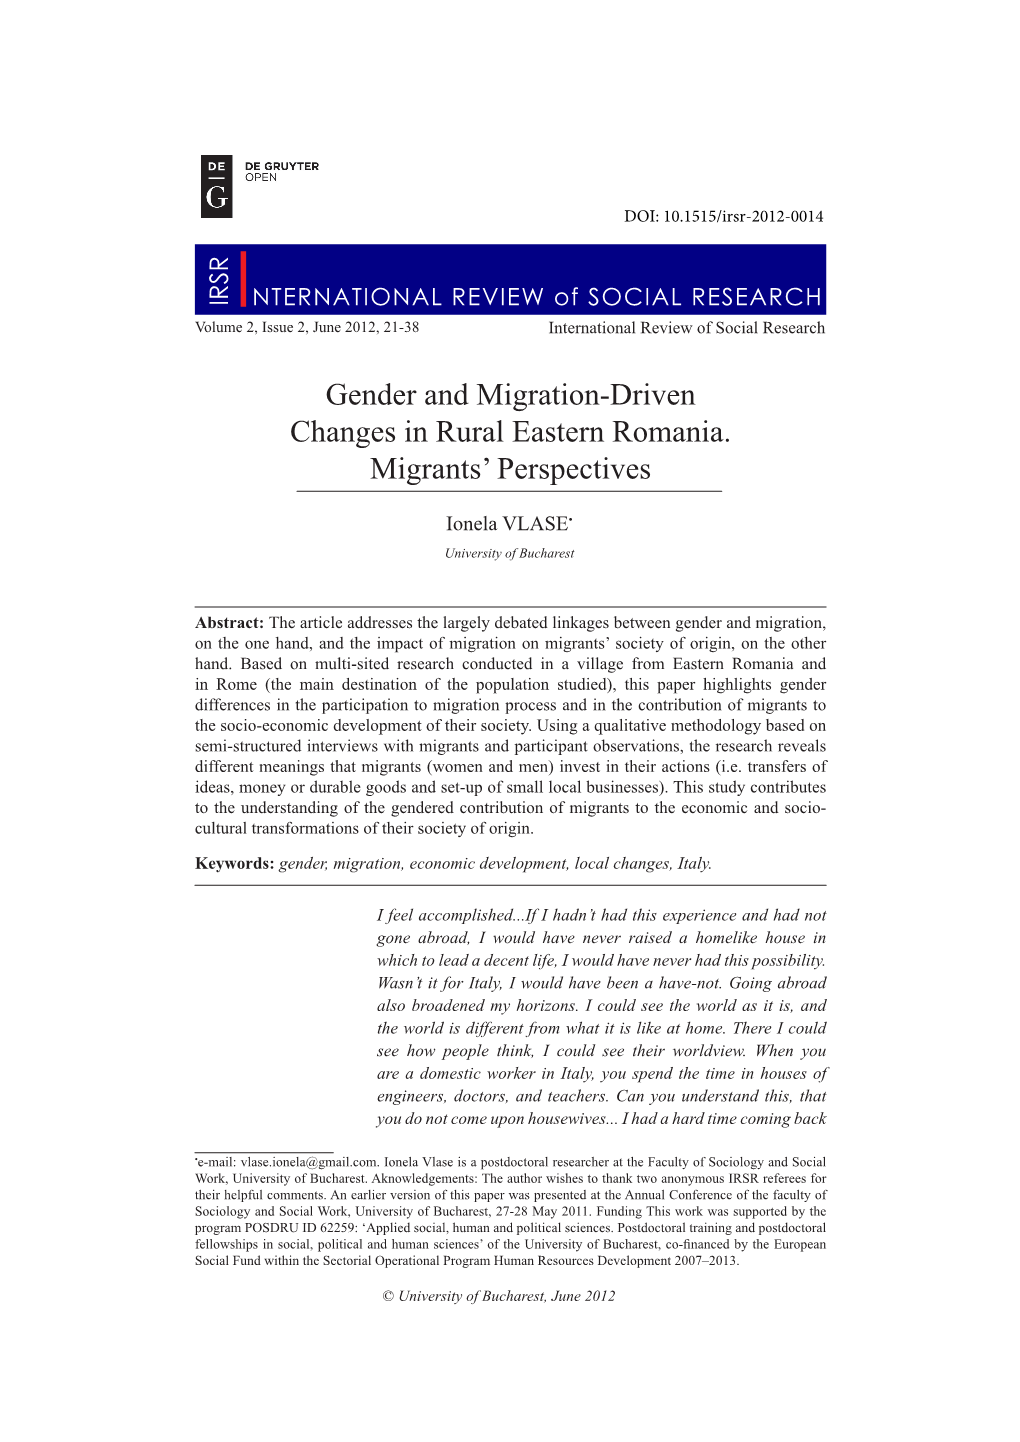 Gender and Migration-Driven Changes in Rural Eastern Romania